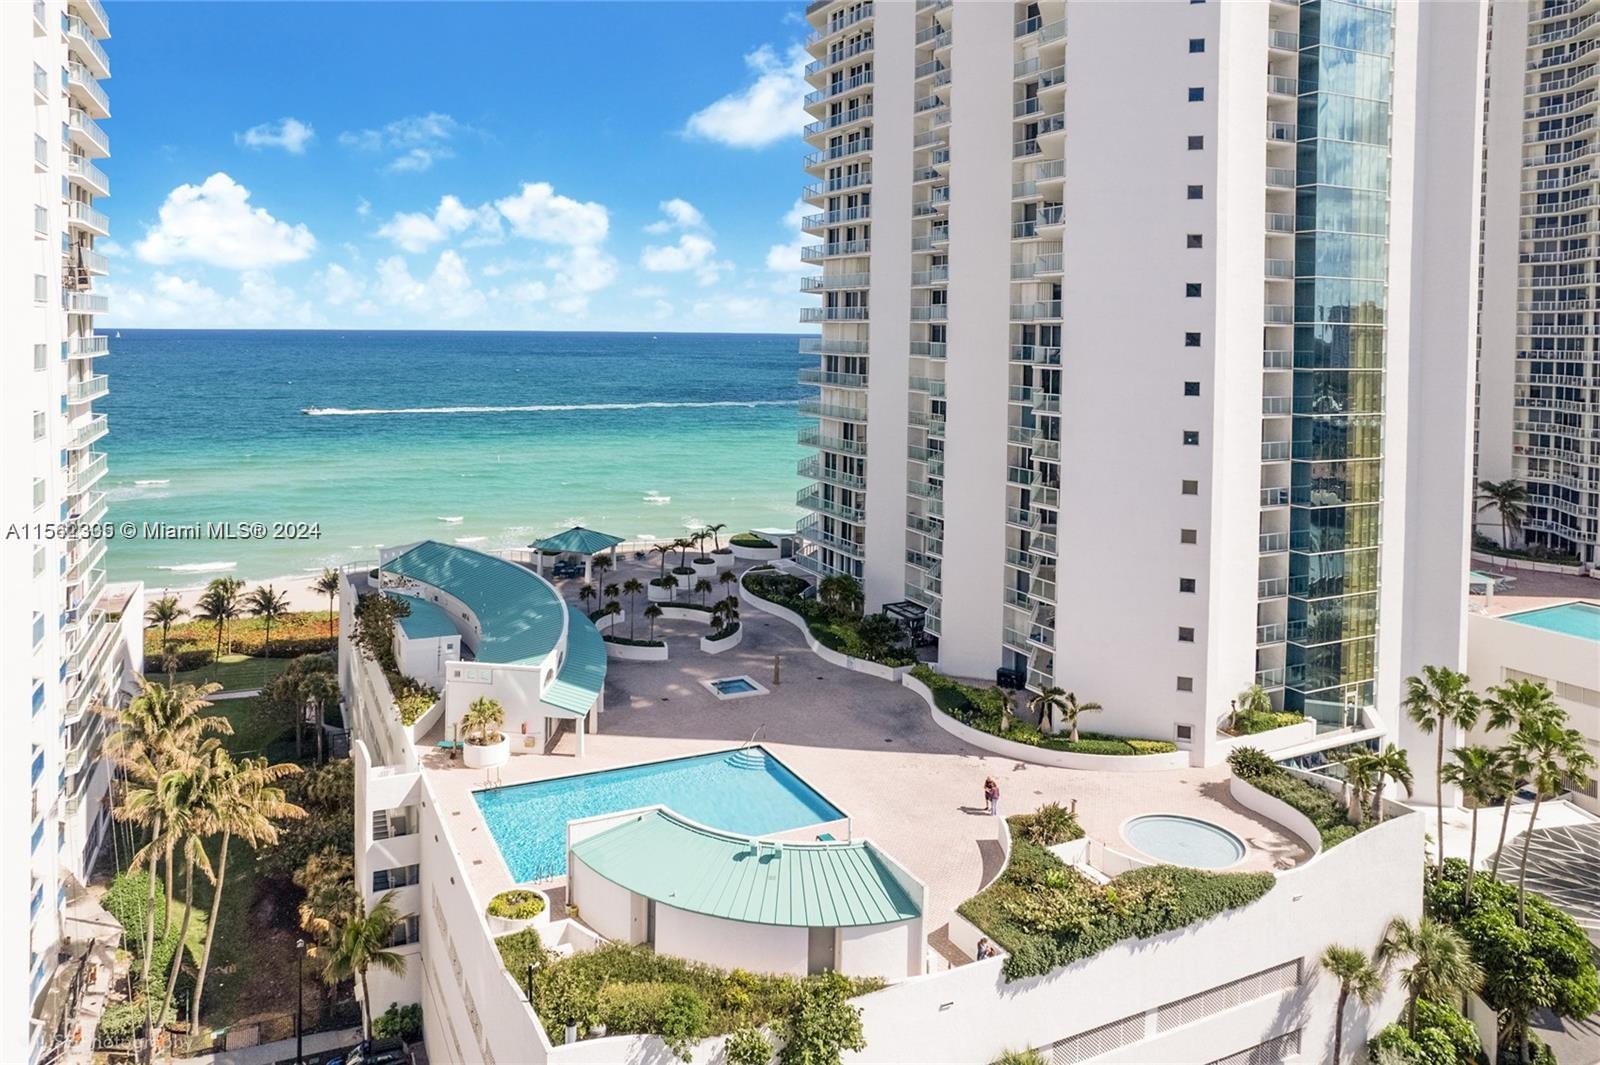 This unique 3 bedroom 3.5 bath oceanfront residence located in prestigious Sunny Isles offers an oversized terrace in with ocean views.  Fully  furnished unit offers lots of natural light throughout and boasts 2,970 sq ft. The spacious floor plan offers an open-concept with the living room and main master suite opening up to an expansive wrap around terrace with views of the ocean. Custom kitchen boasts large center island with breakfast bar, stainless-steel appliances and wine fridge. Master bathroom with travertine, dual-sinks and large jacuzzi tub, while second master bedroom includes an office nook. Resort-style living at Oceania offers amenities such as beach access, fitness center, spa, tennis, basketball and racquetball courts, private marina, and so much more.